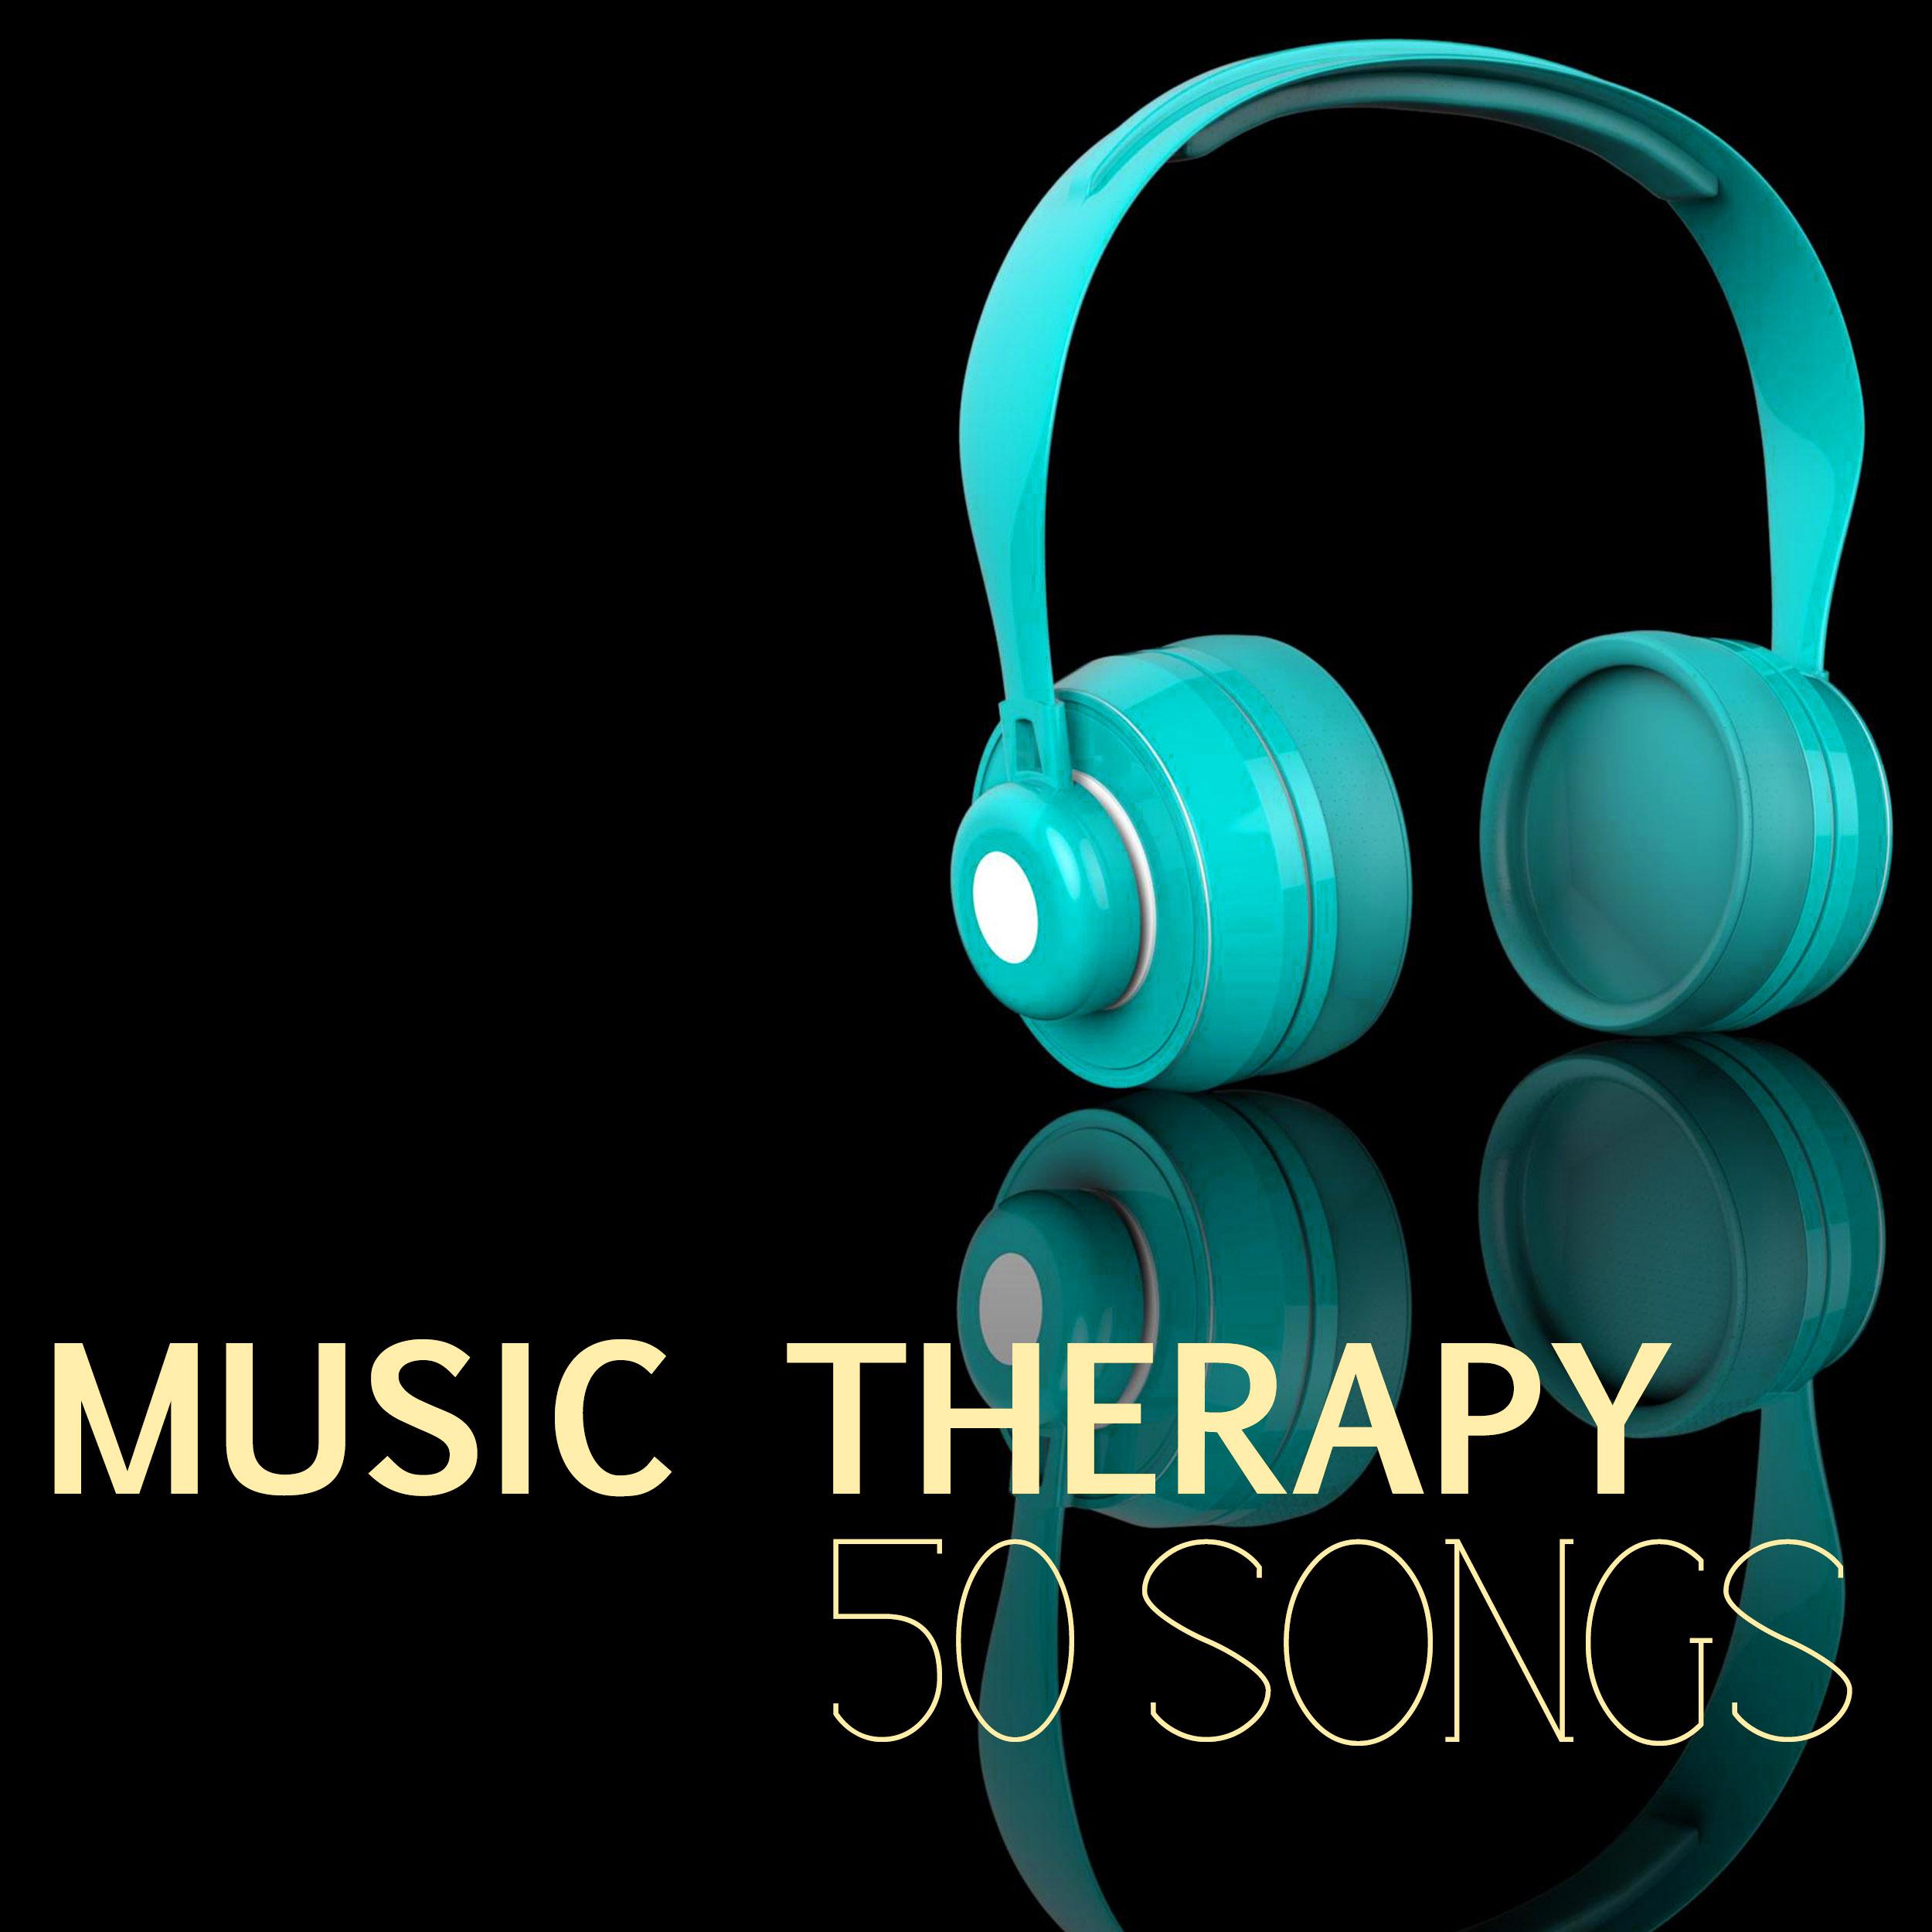 Music Therapy - 50 Songs for Sleep Solutions, Deep Relaxation Tracks for Mindfulness Meditation